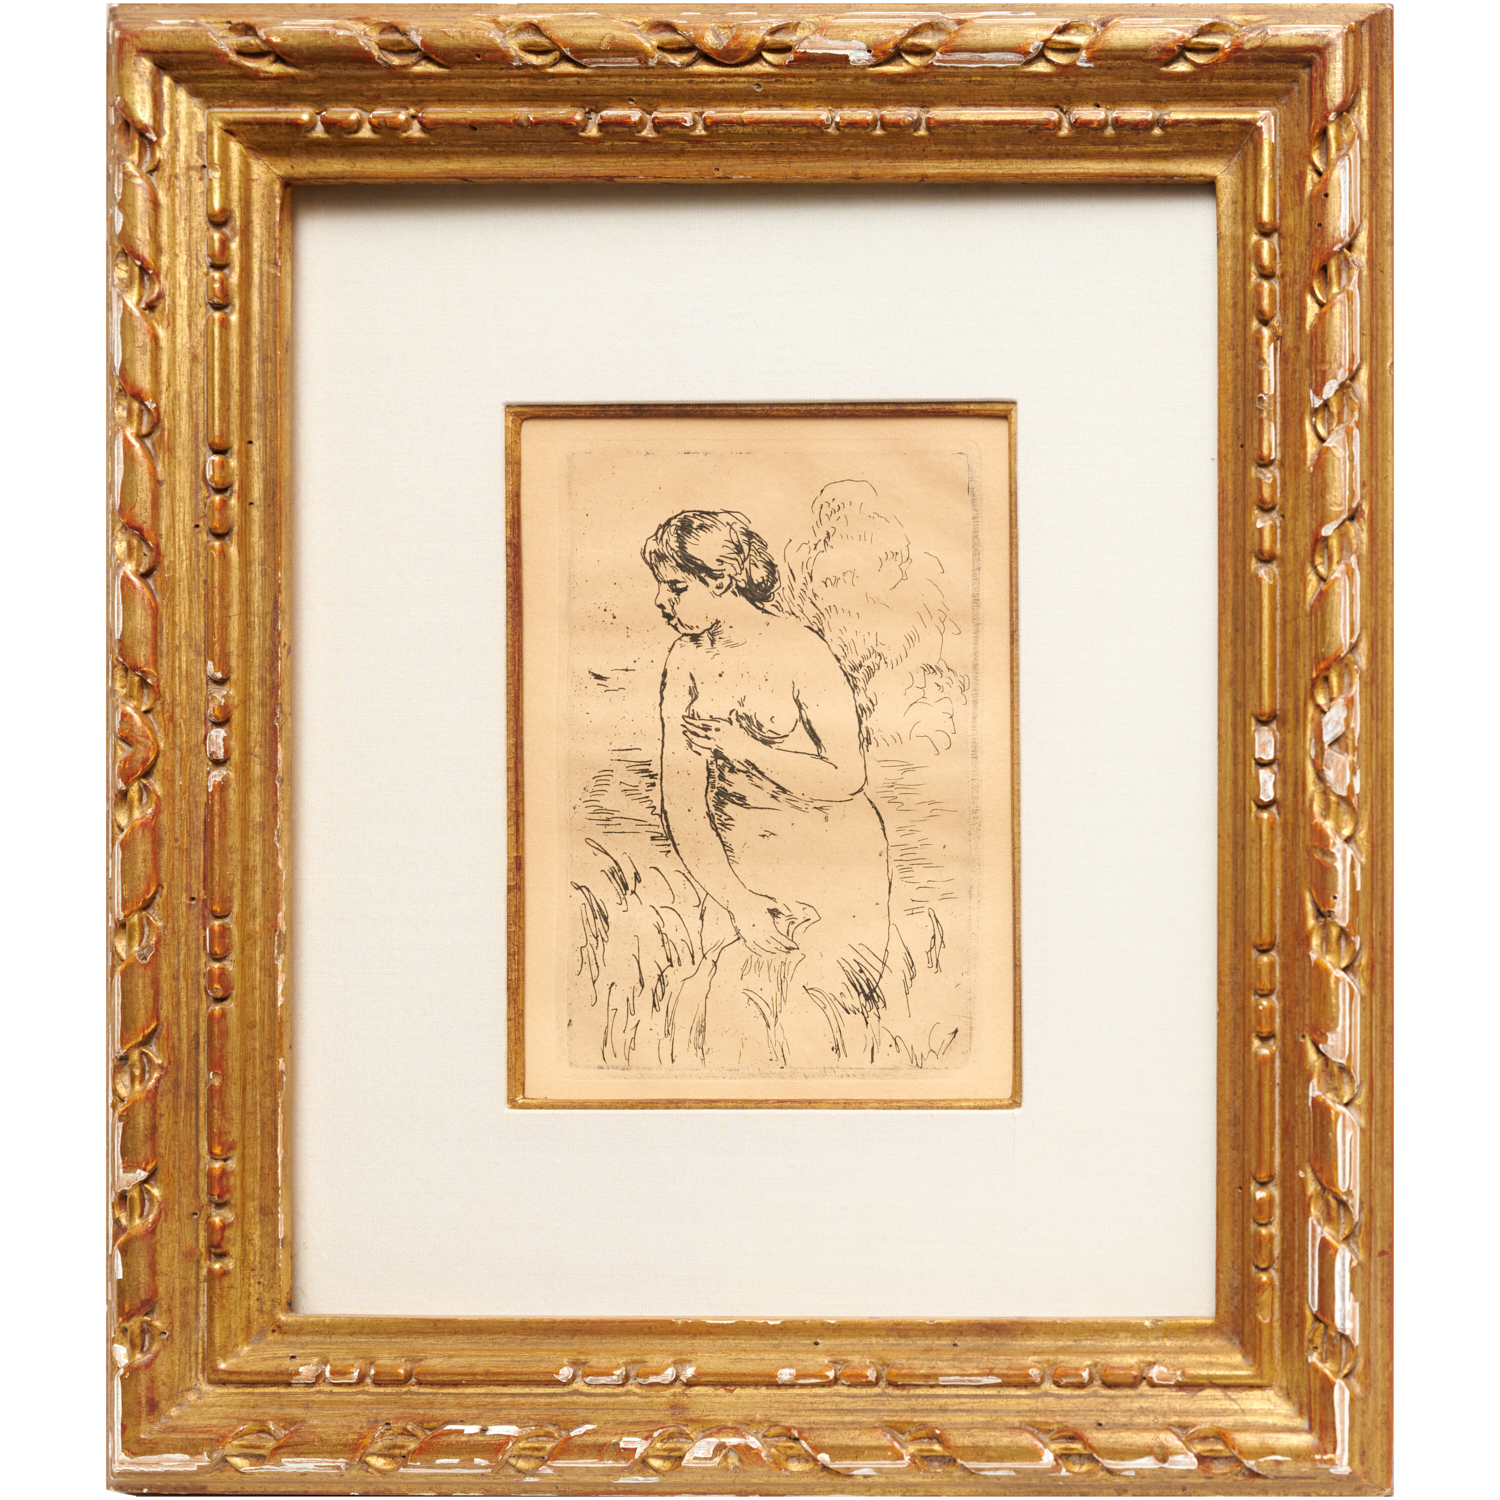 AUGUSTE RENOIR THE BATHER ETCHING 2ce019